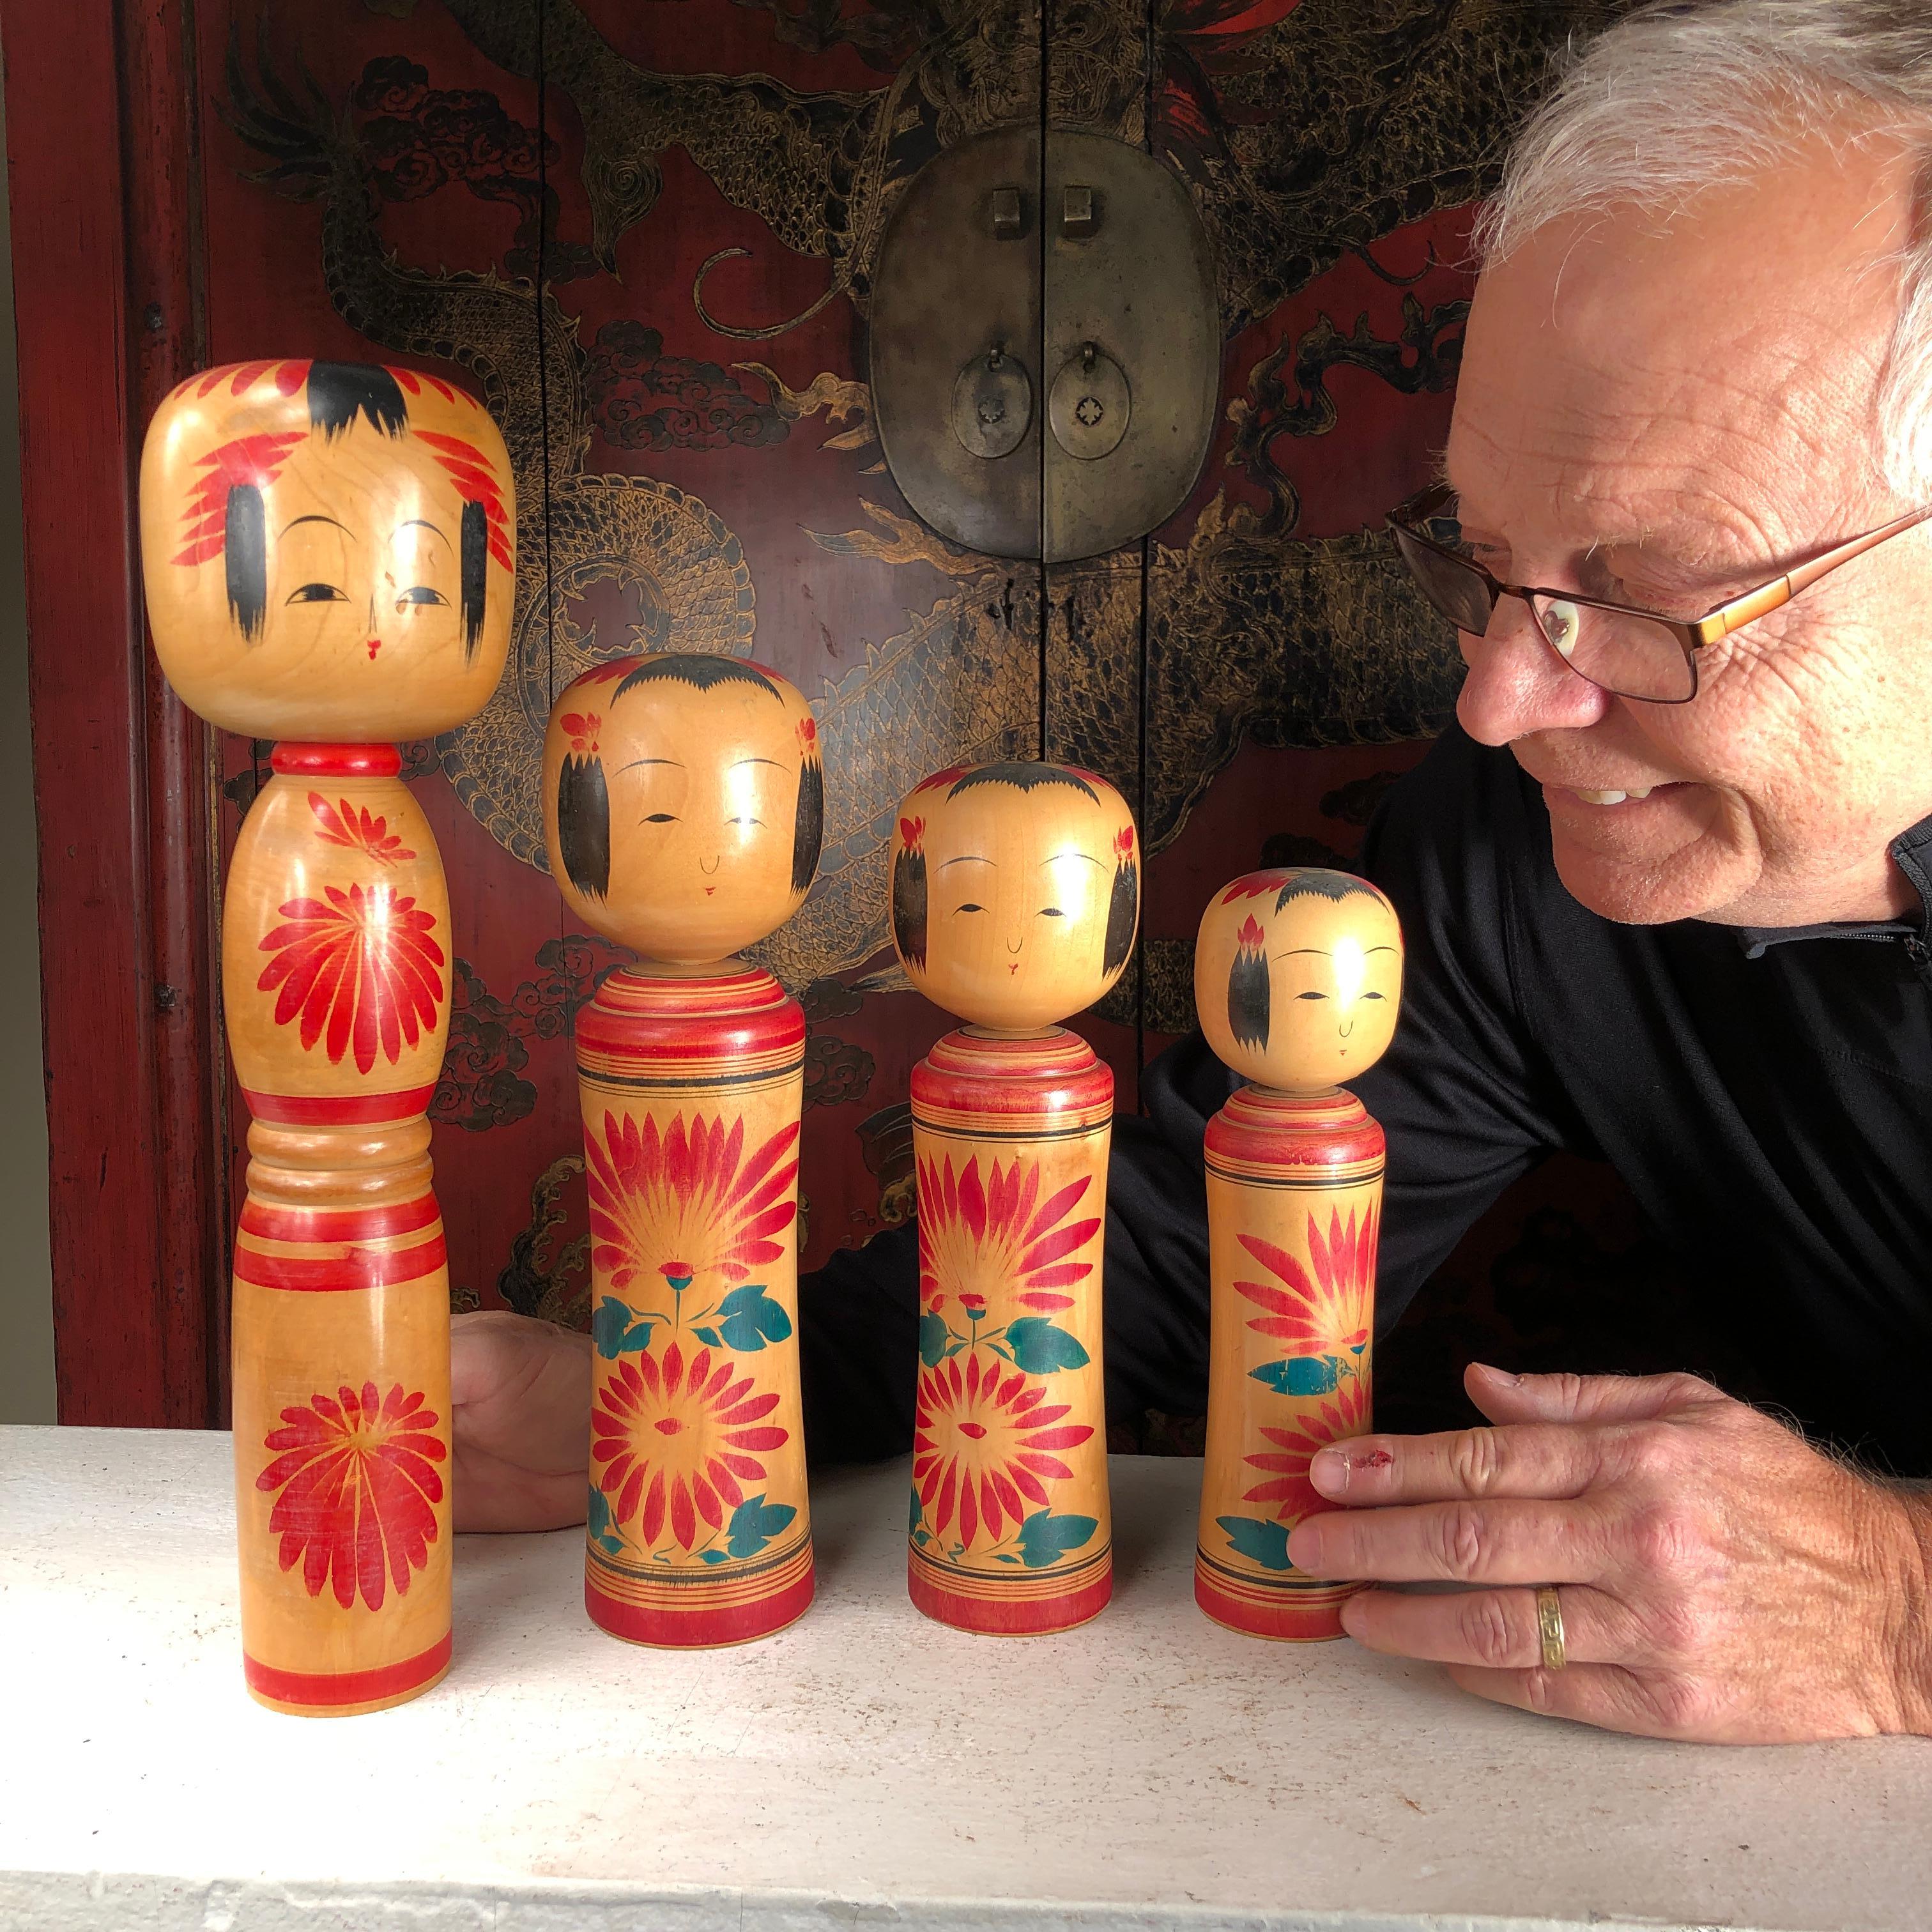 Four big hand painted and signed Kokeshi Dolls from Old Japan.

A beautifully preserved set of Japanese Folk Art hand carved and hand painted Kokeshi dolls one of Japan's most popular antique doll collectibles and unique handicraft forms. They are